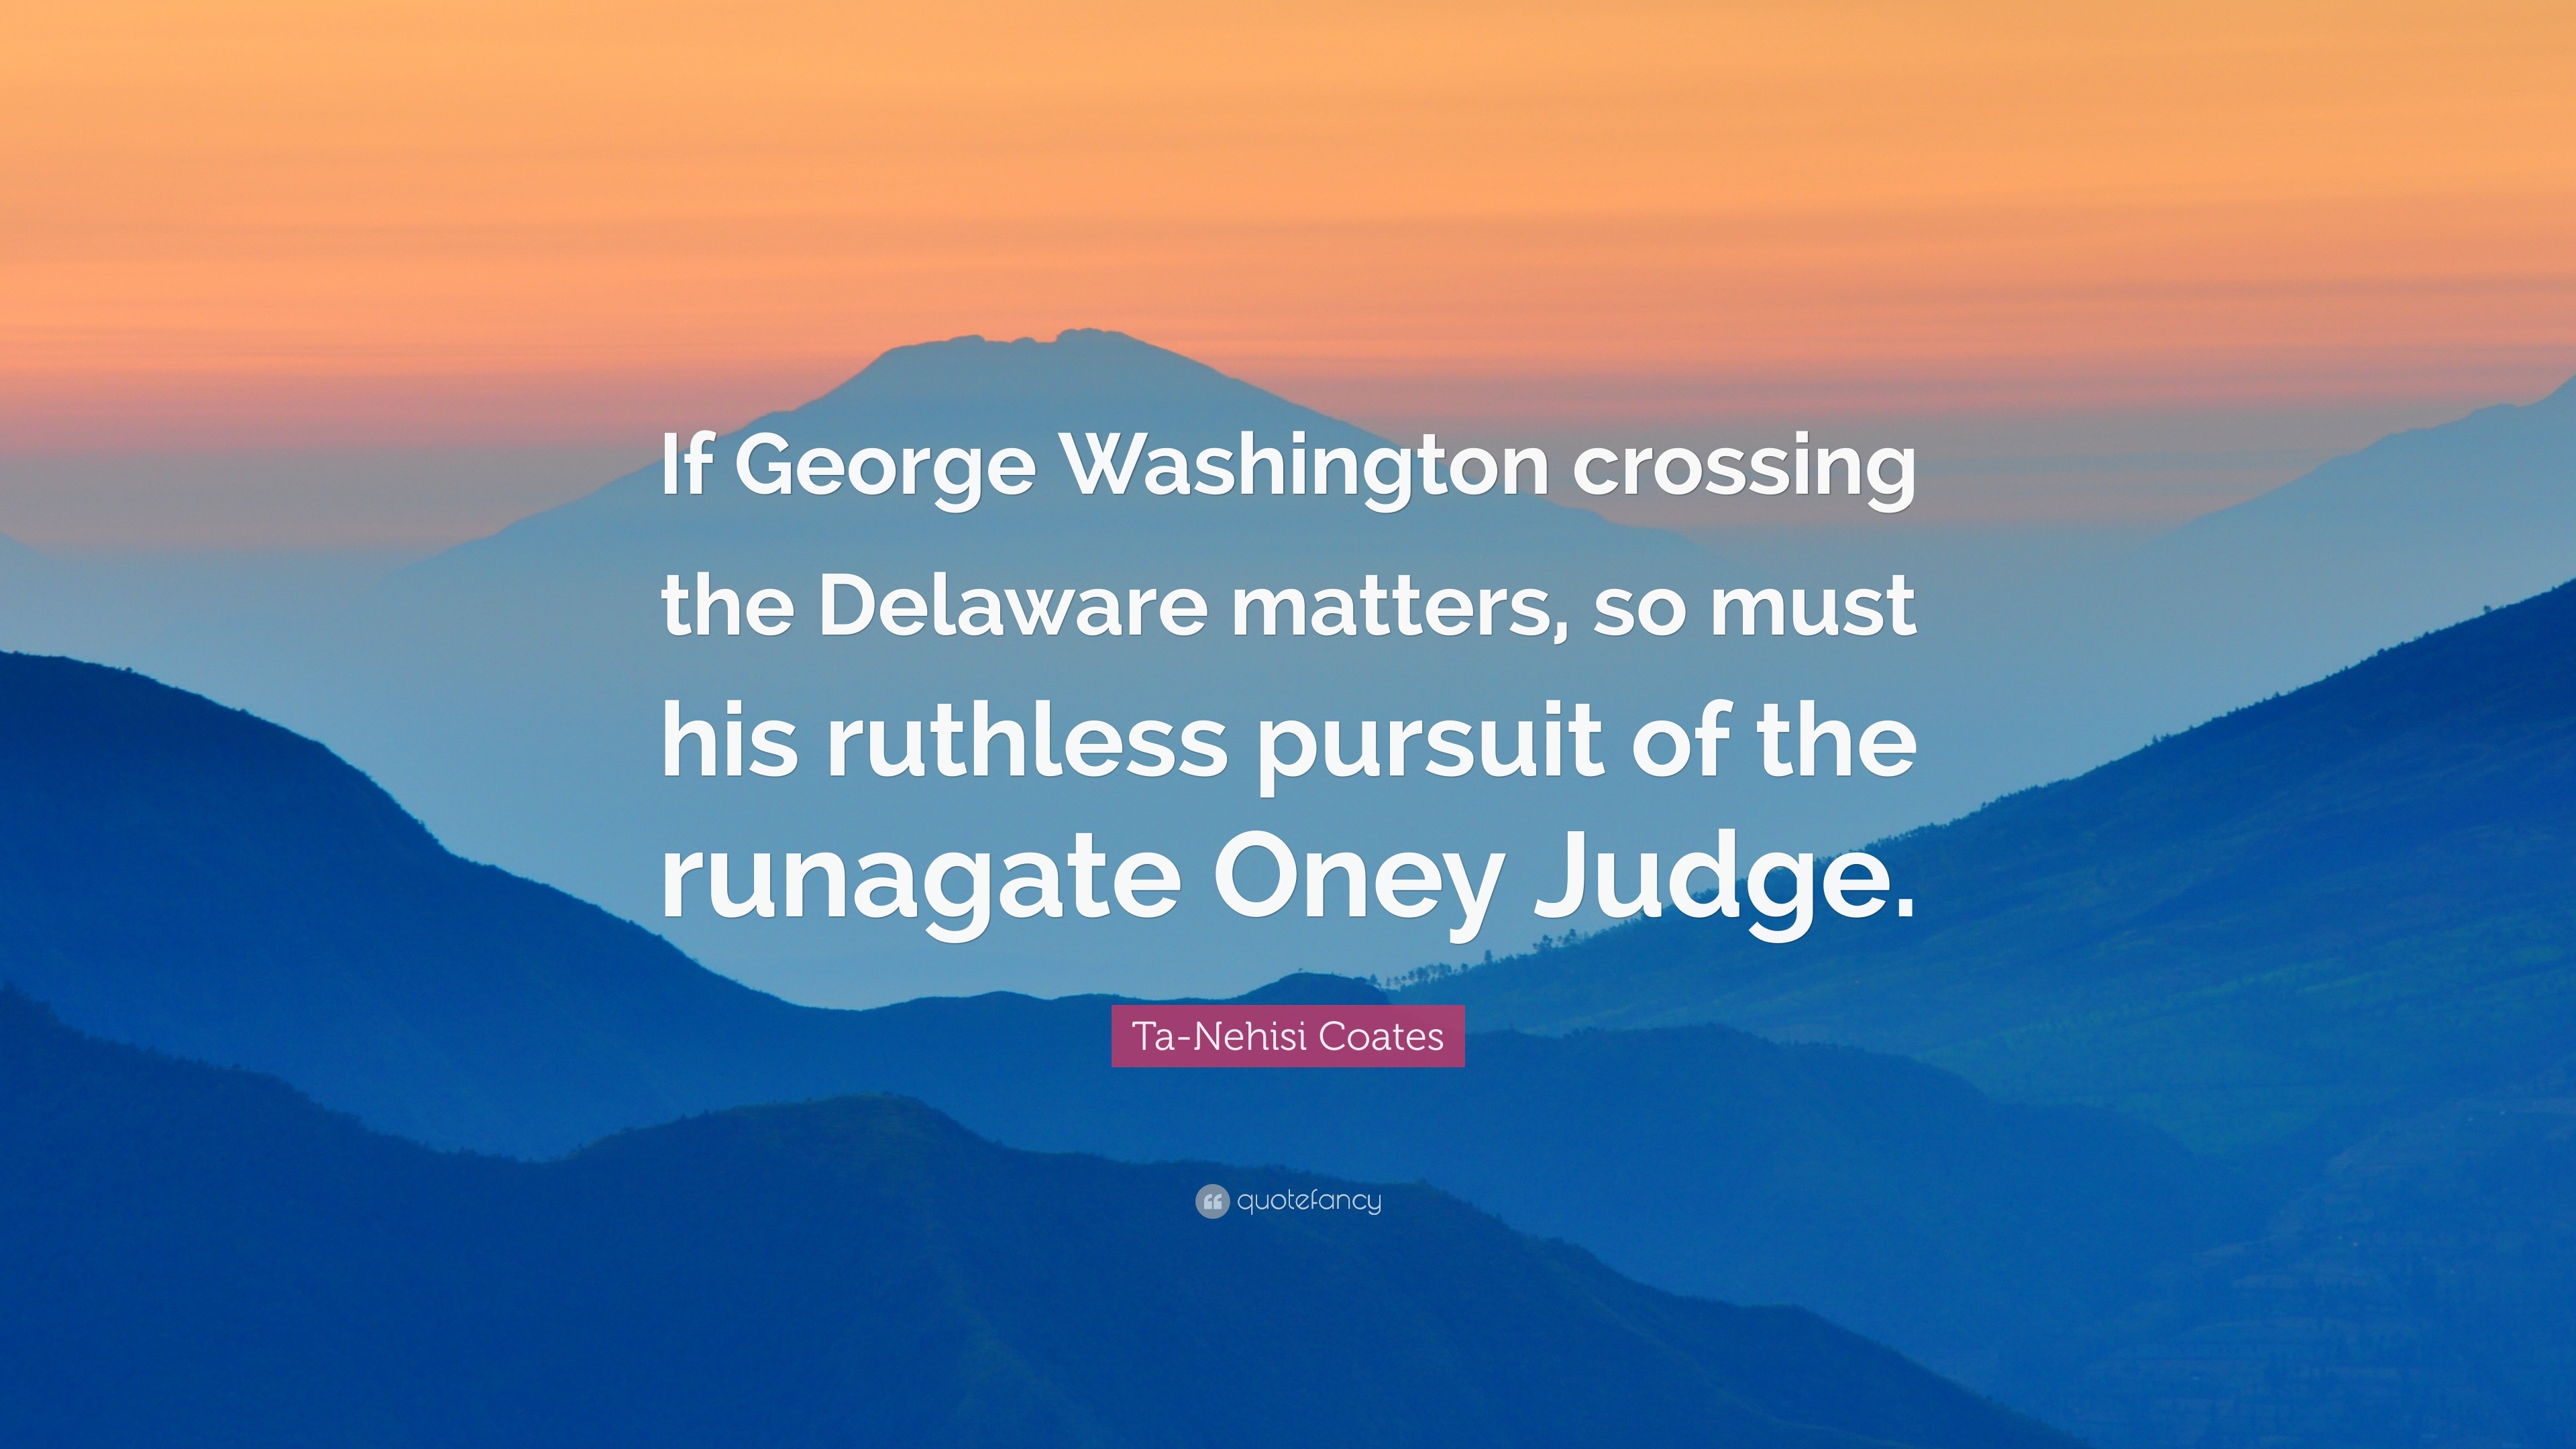 Ta Nehisi Coates Quote If George Washington crossing the Delaware matters, so